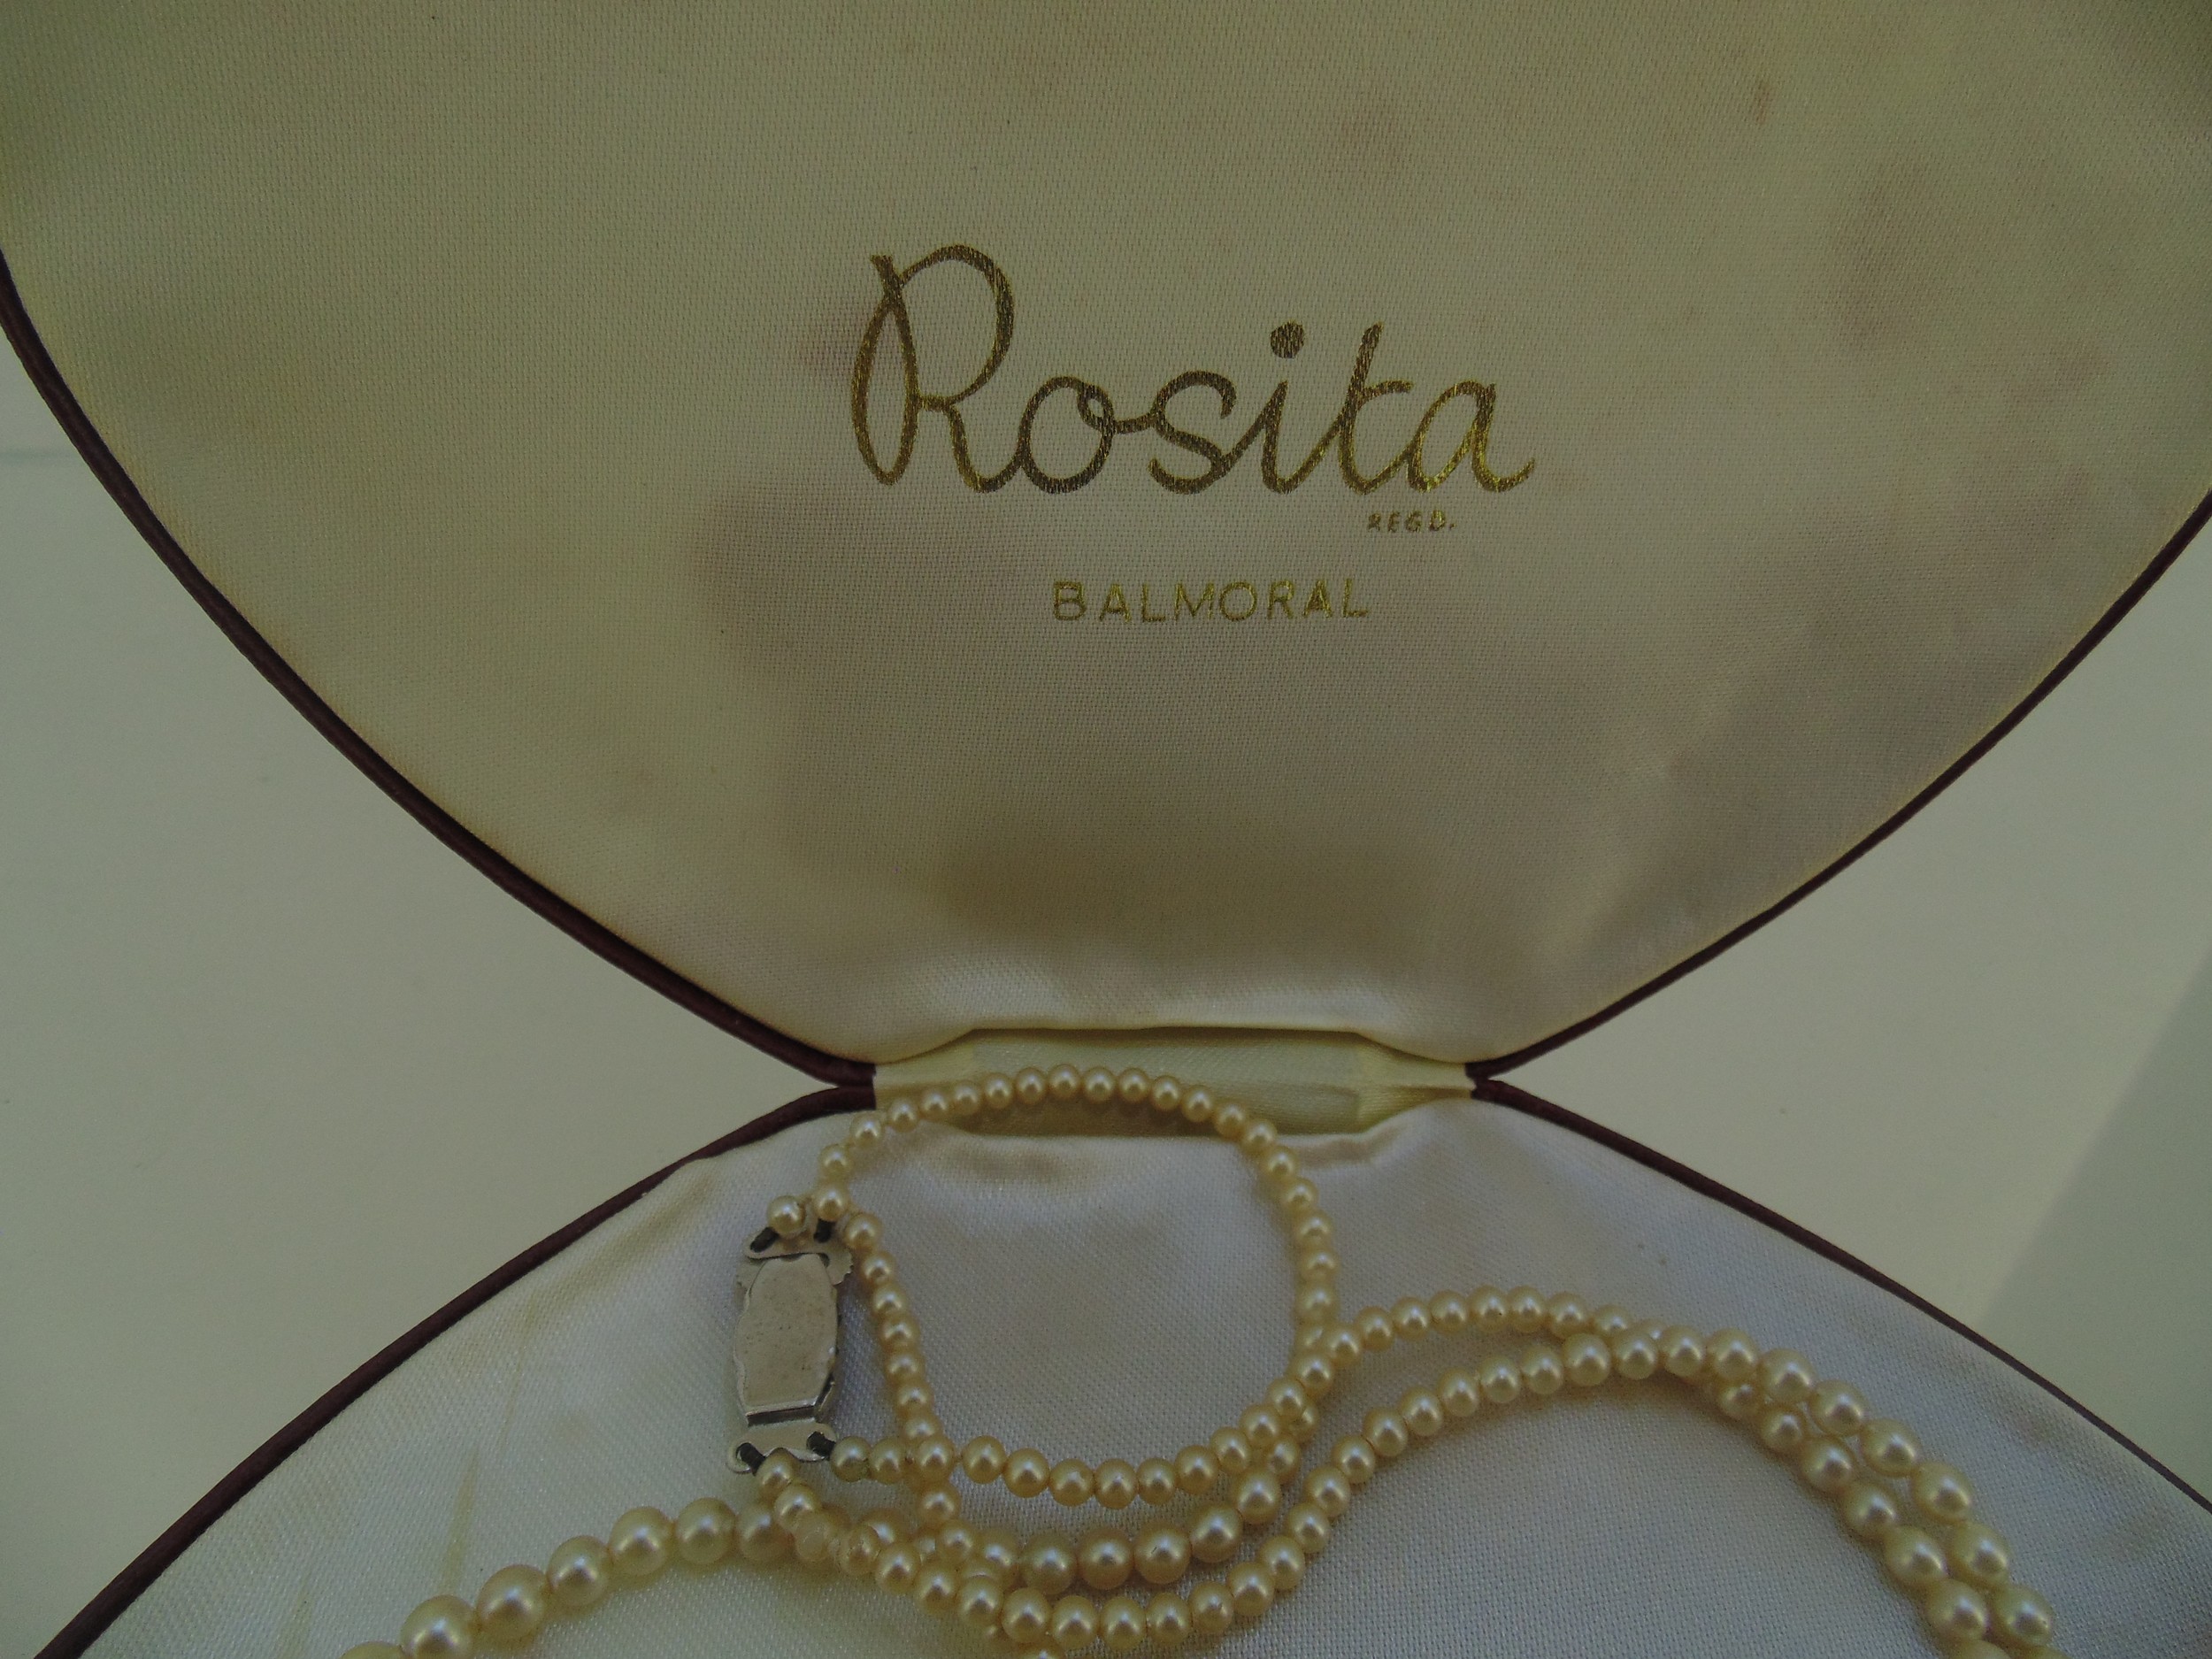 Rosita bal morrow Pearl Necklace in case - Image 2 of 4